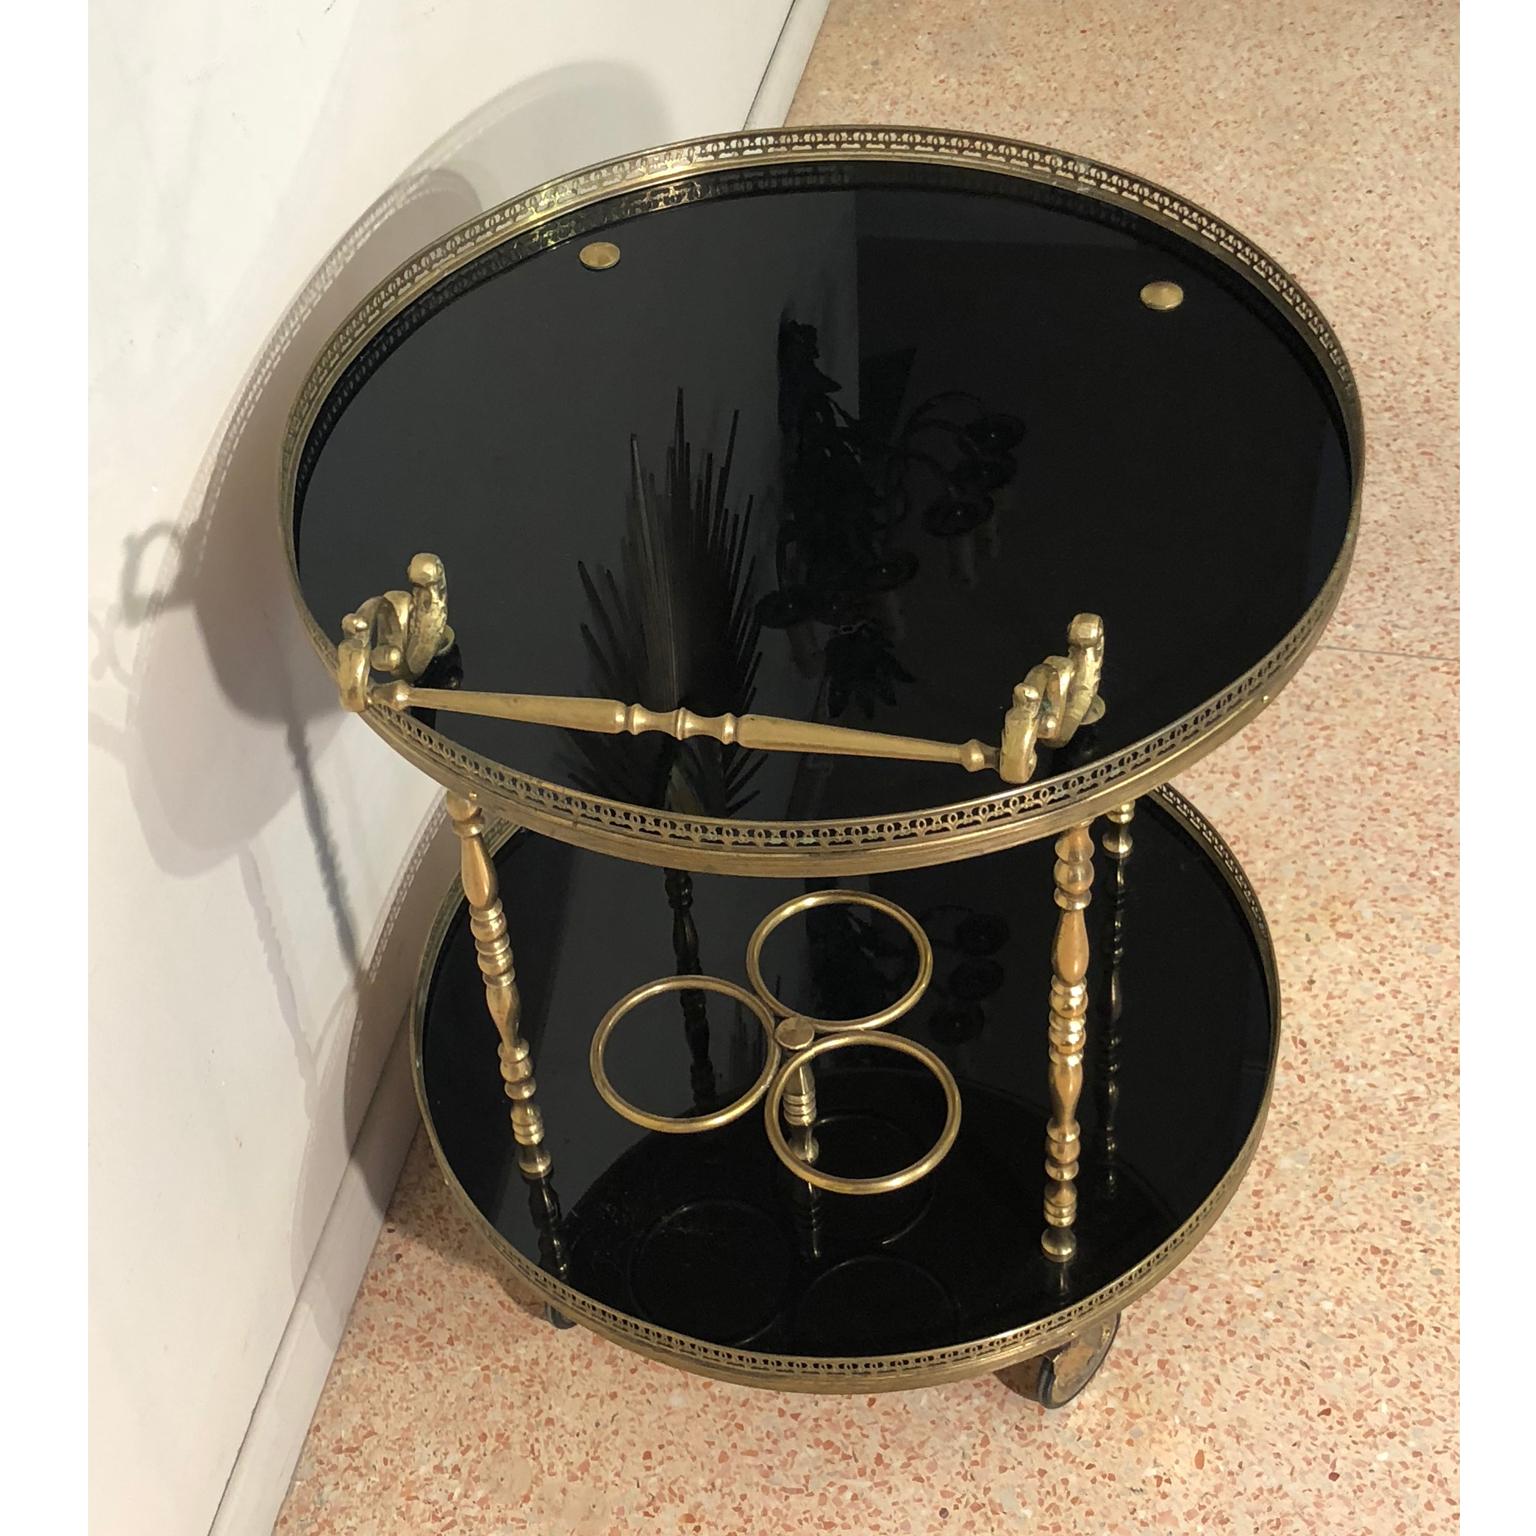 Brass and shiny black lacquer rounded bottle holder tray, France 1940s. Four wheels make it easy to be moved around. This tray has two shelves lined with brass crown. It comes from France from 1940s. We have restored the brass parts and re lacquered